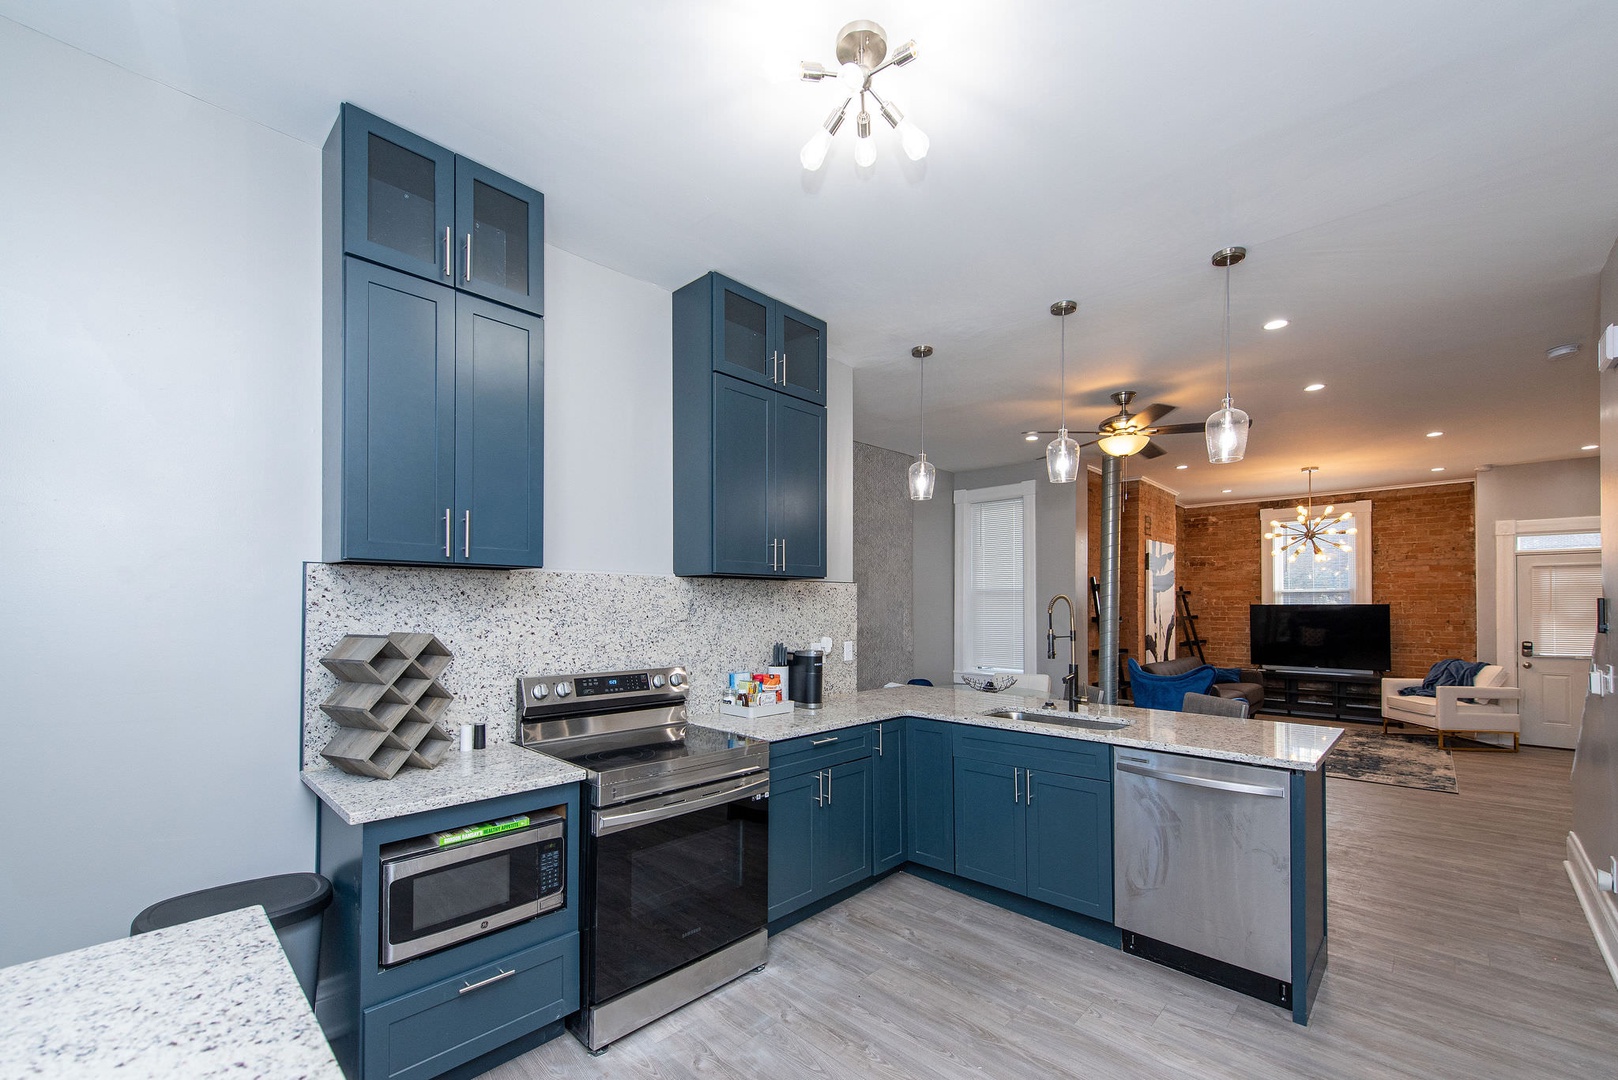 Suite 2 – The kitchen offers ample space & fantastic amenities